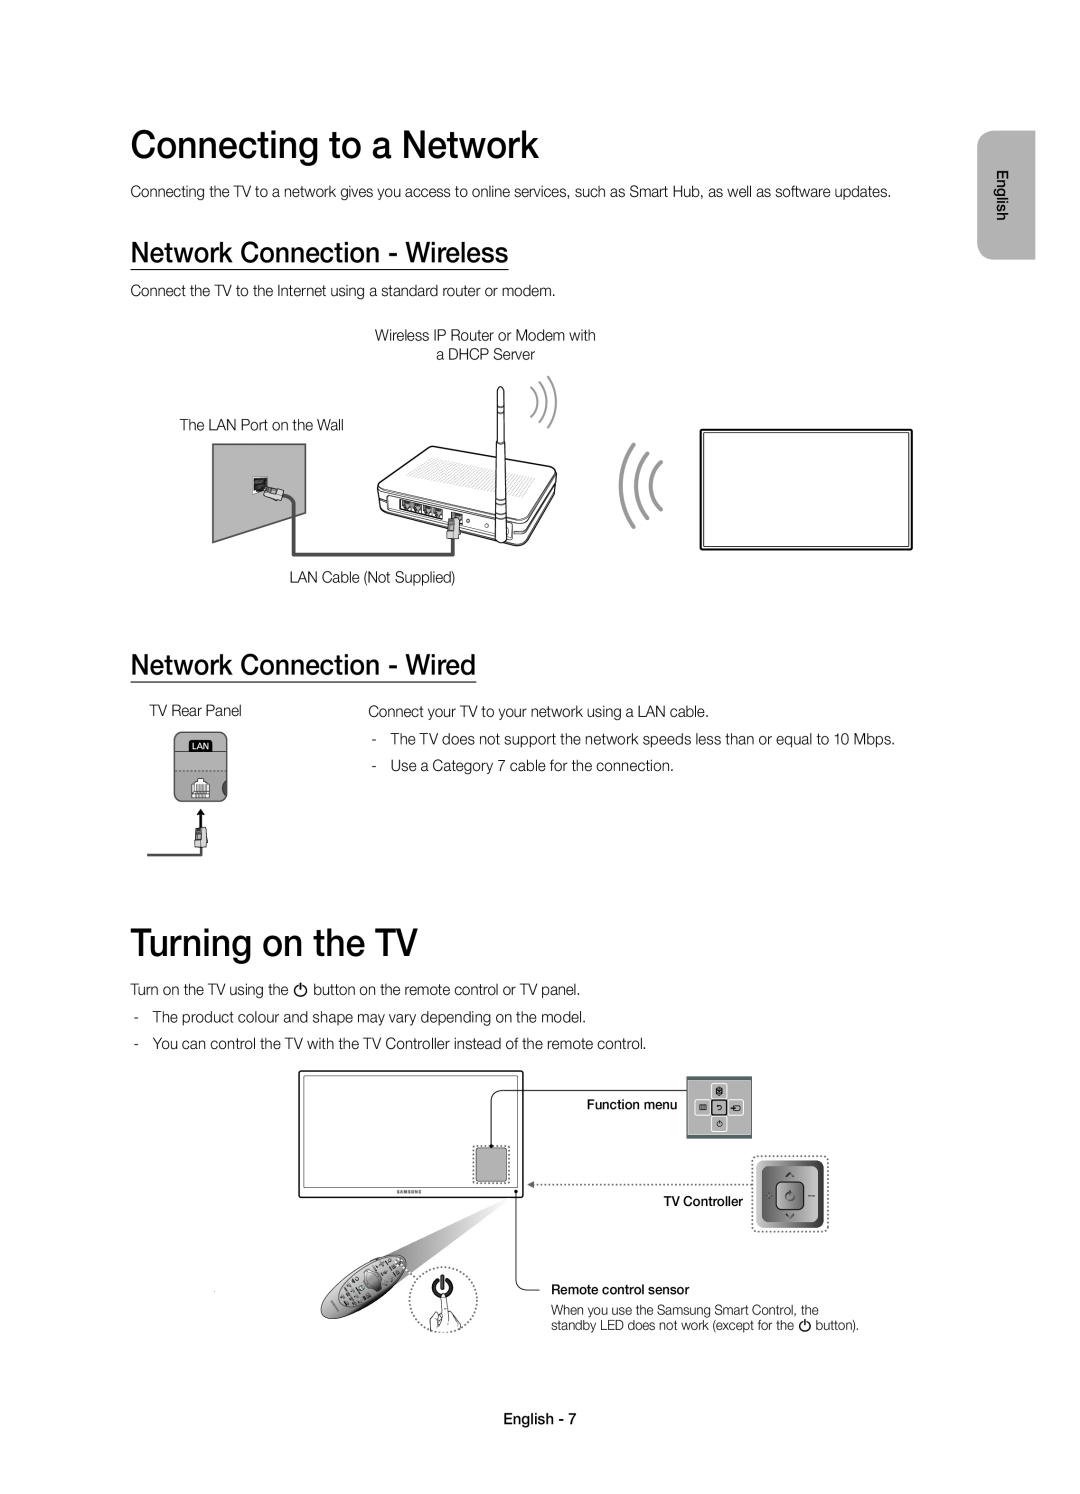 Samsung UE46H7000SZXZT, UE60H7000SZXZT manual Connecting to a Network, Turning on the TV, Network Connection - Wireless 